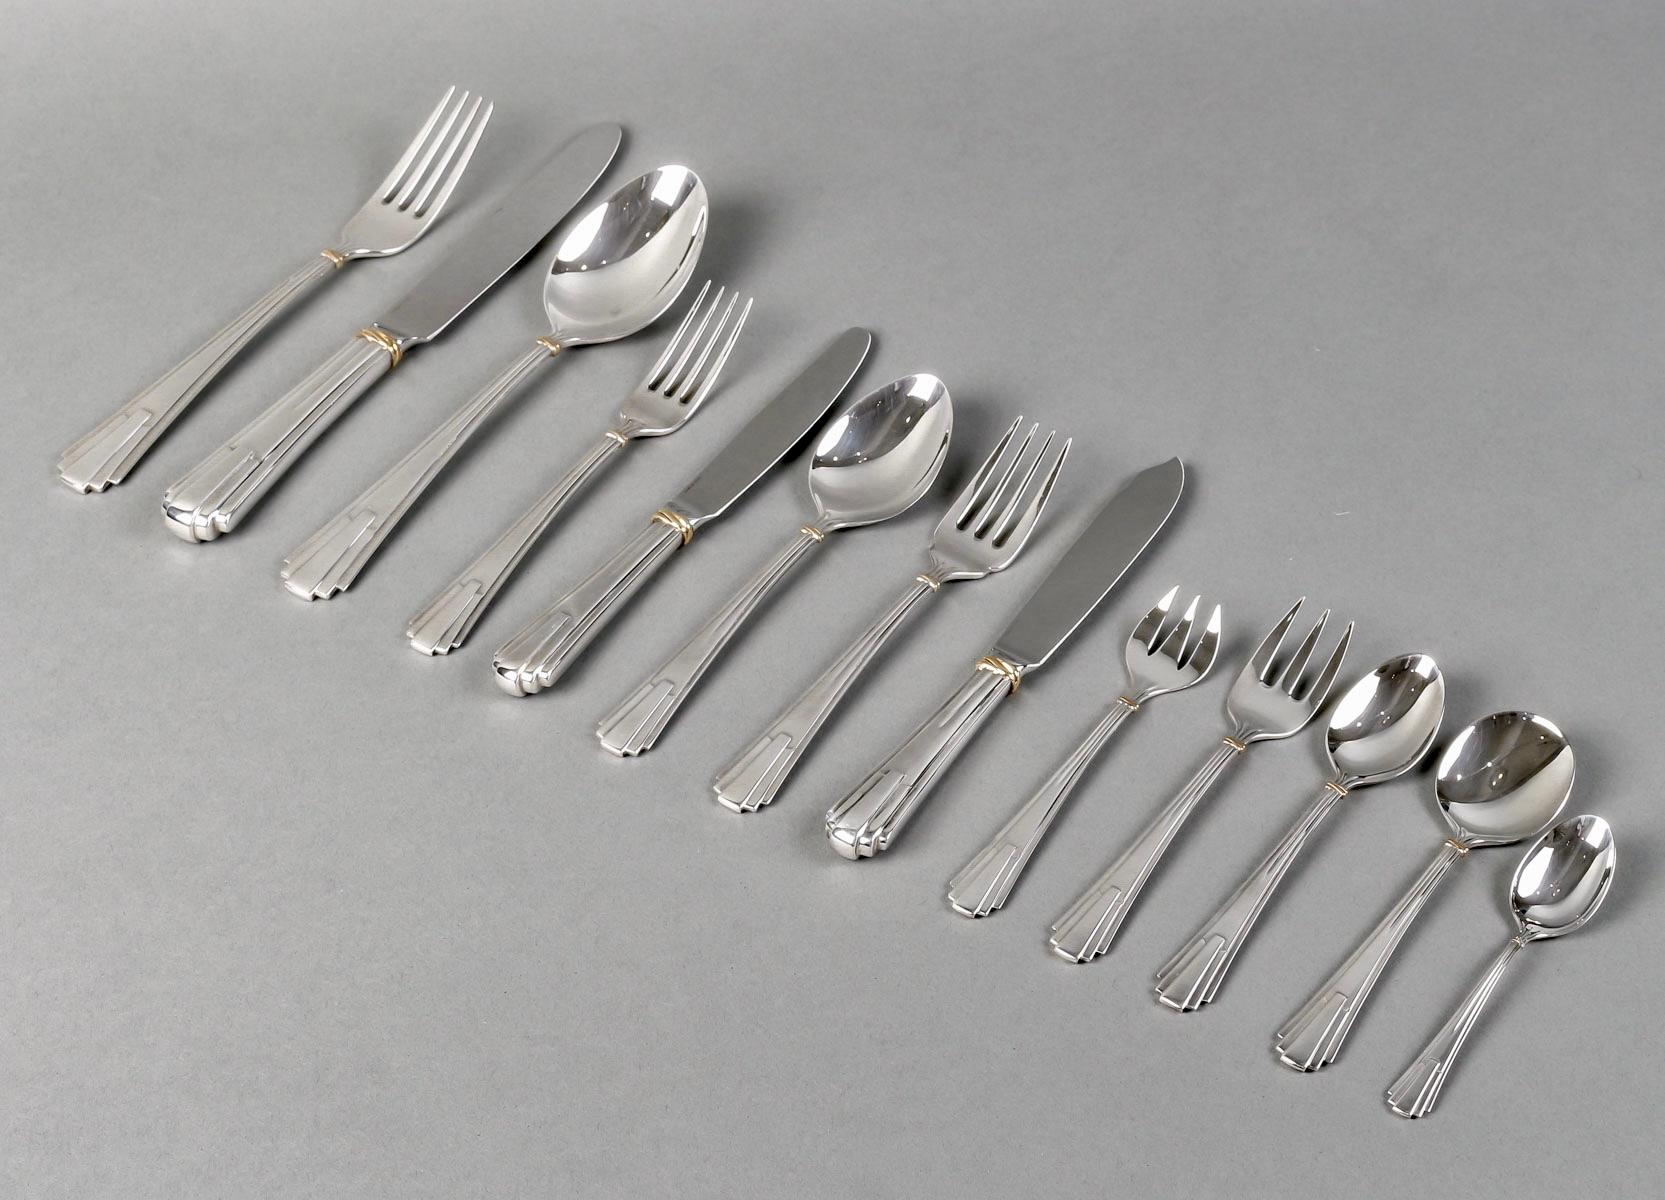 Flatware Cutlery Set “La Maison de Louis Cartier” made in sterling silver by Cartier in 1986.
Each piece is signed “Cartier” in a golden cartouche, stamped 925 and numbered. 

Excellent condition. All the pieces are in box.

Set for 18 people of 251